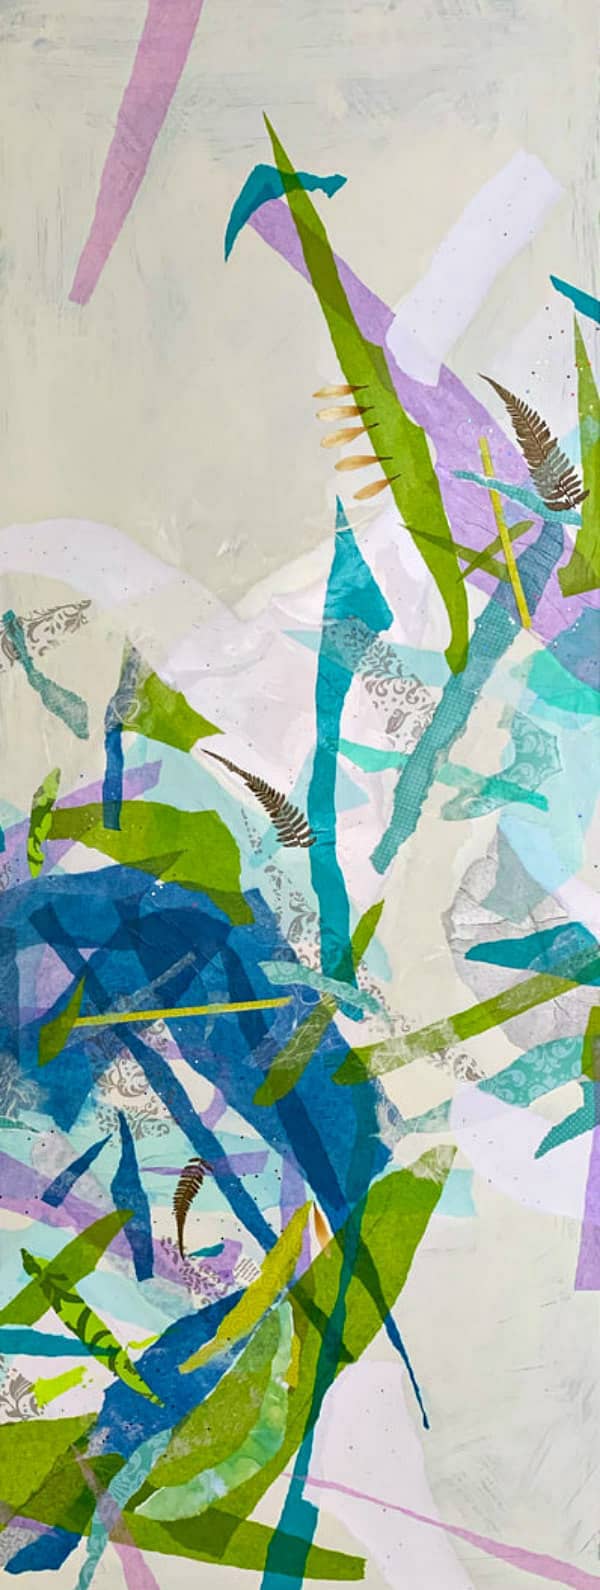 colorful torn paper collage in shades of aqua, lime green, and lavender with added fern bits